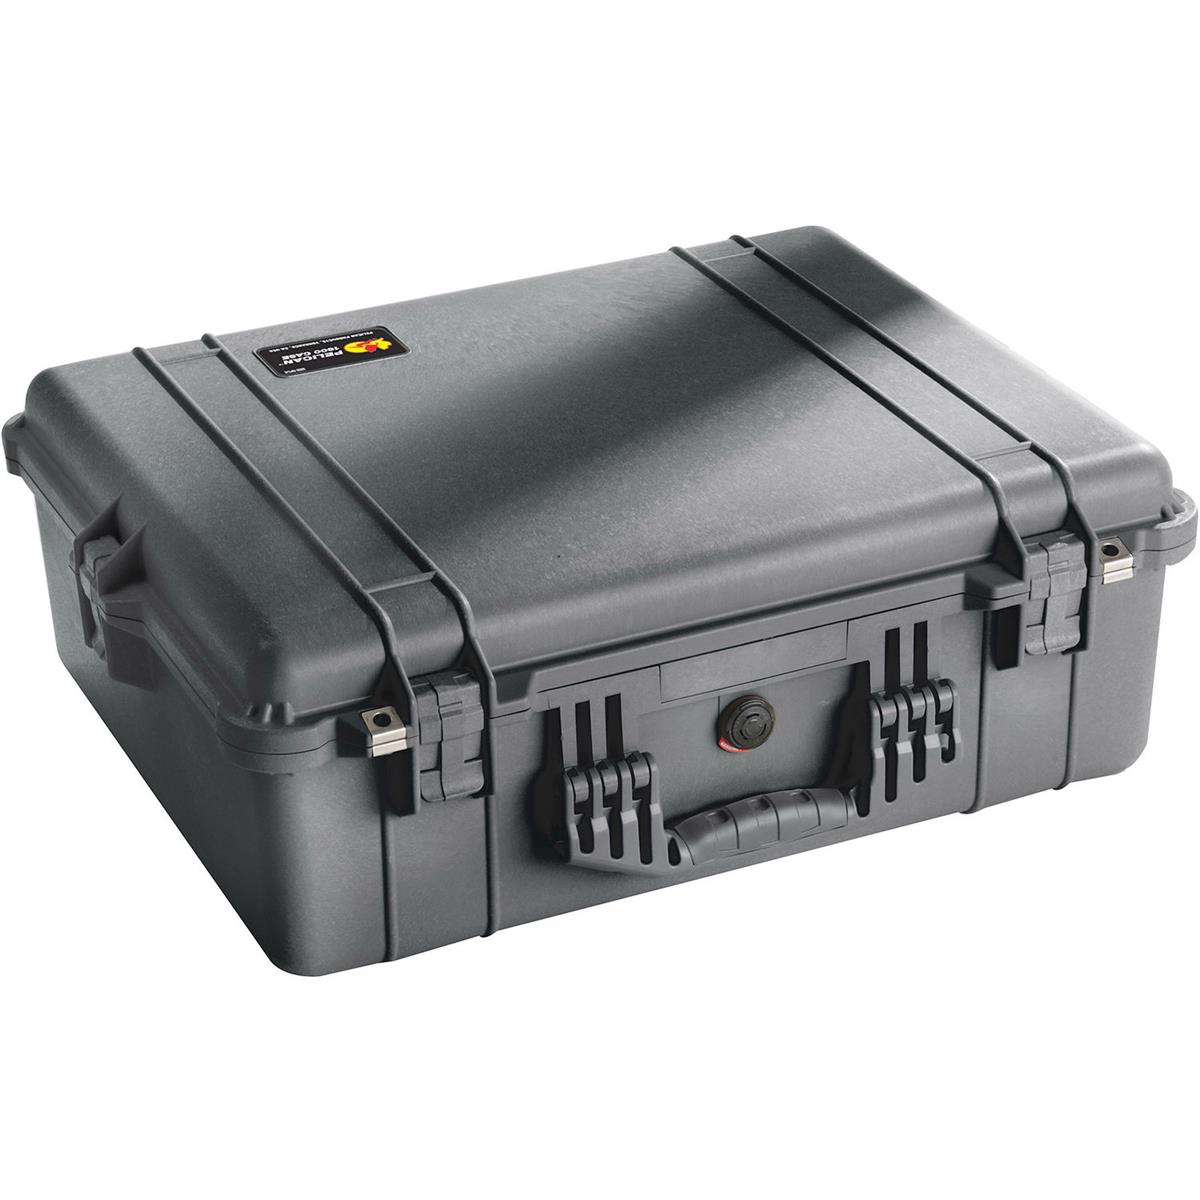 Pelican 1600 Watertight Hard Case with Dividers - Black -  1600-004-110